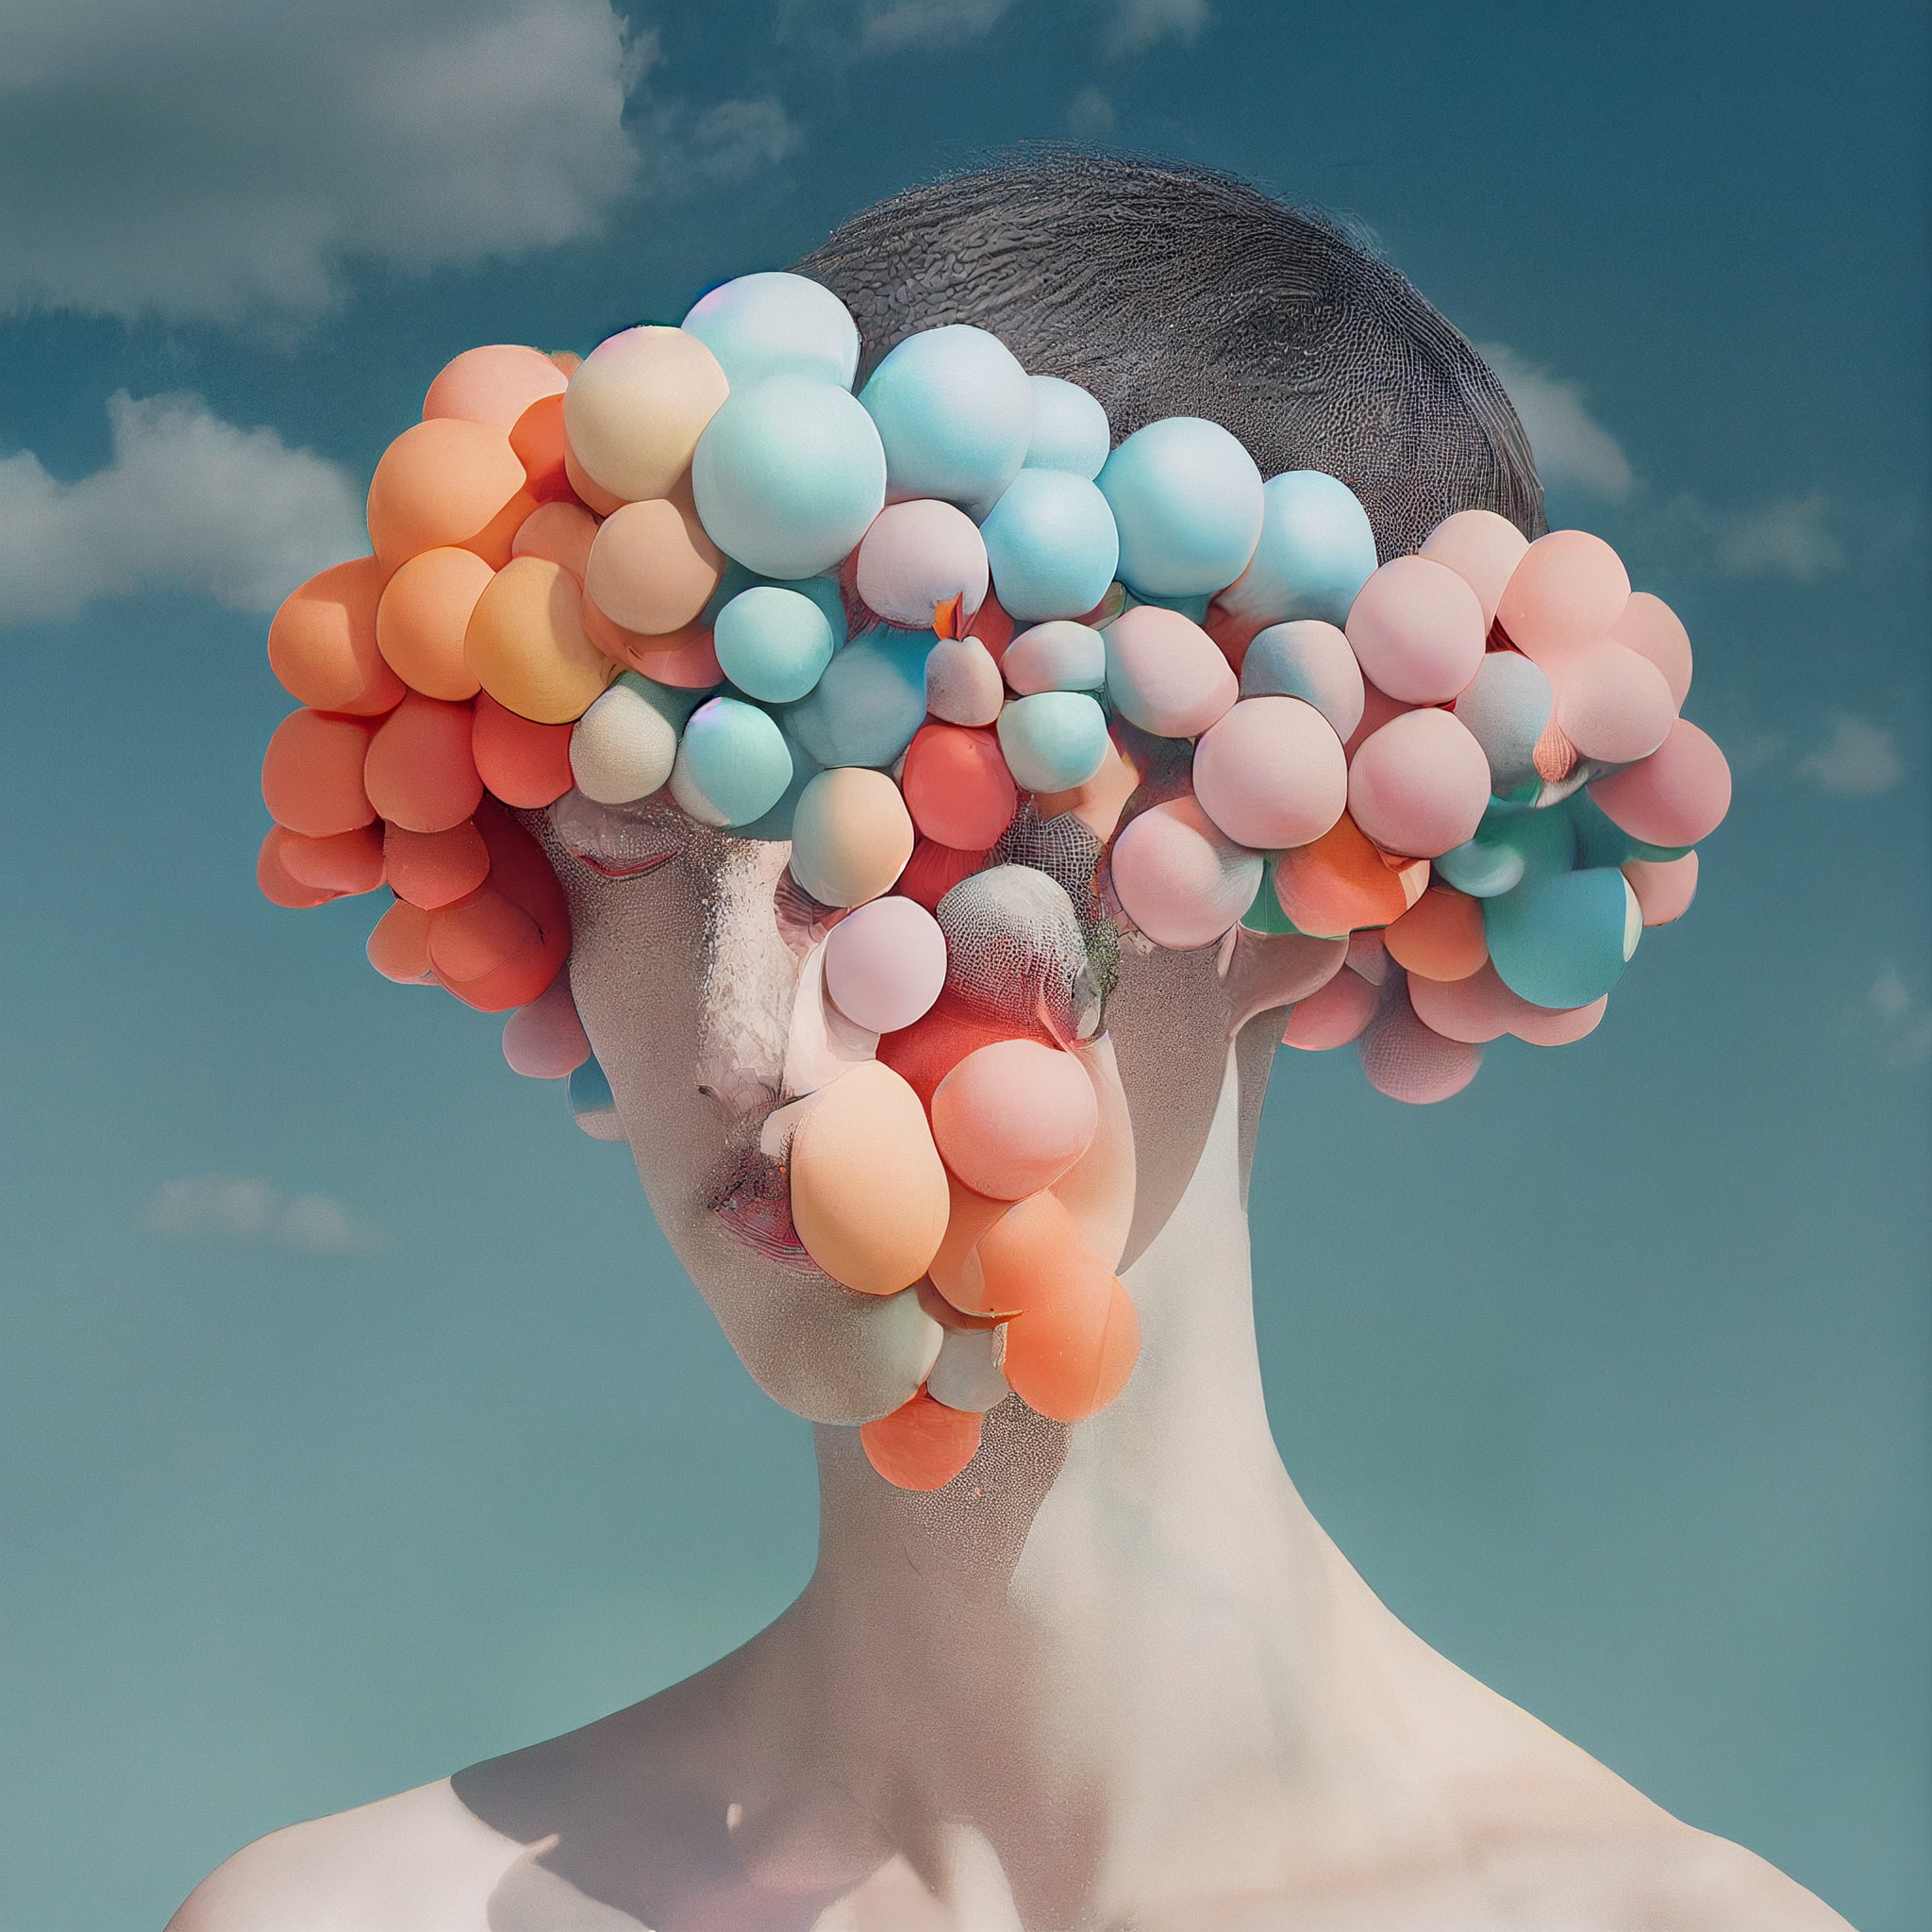 sines_gorgeous_surreal_ethereal_Olivia_Locher_and_Erik_Ma_178a6b77-5894-4ae0-aff2-08d432005920